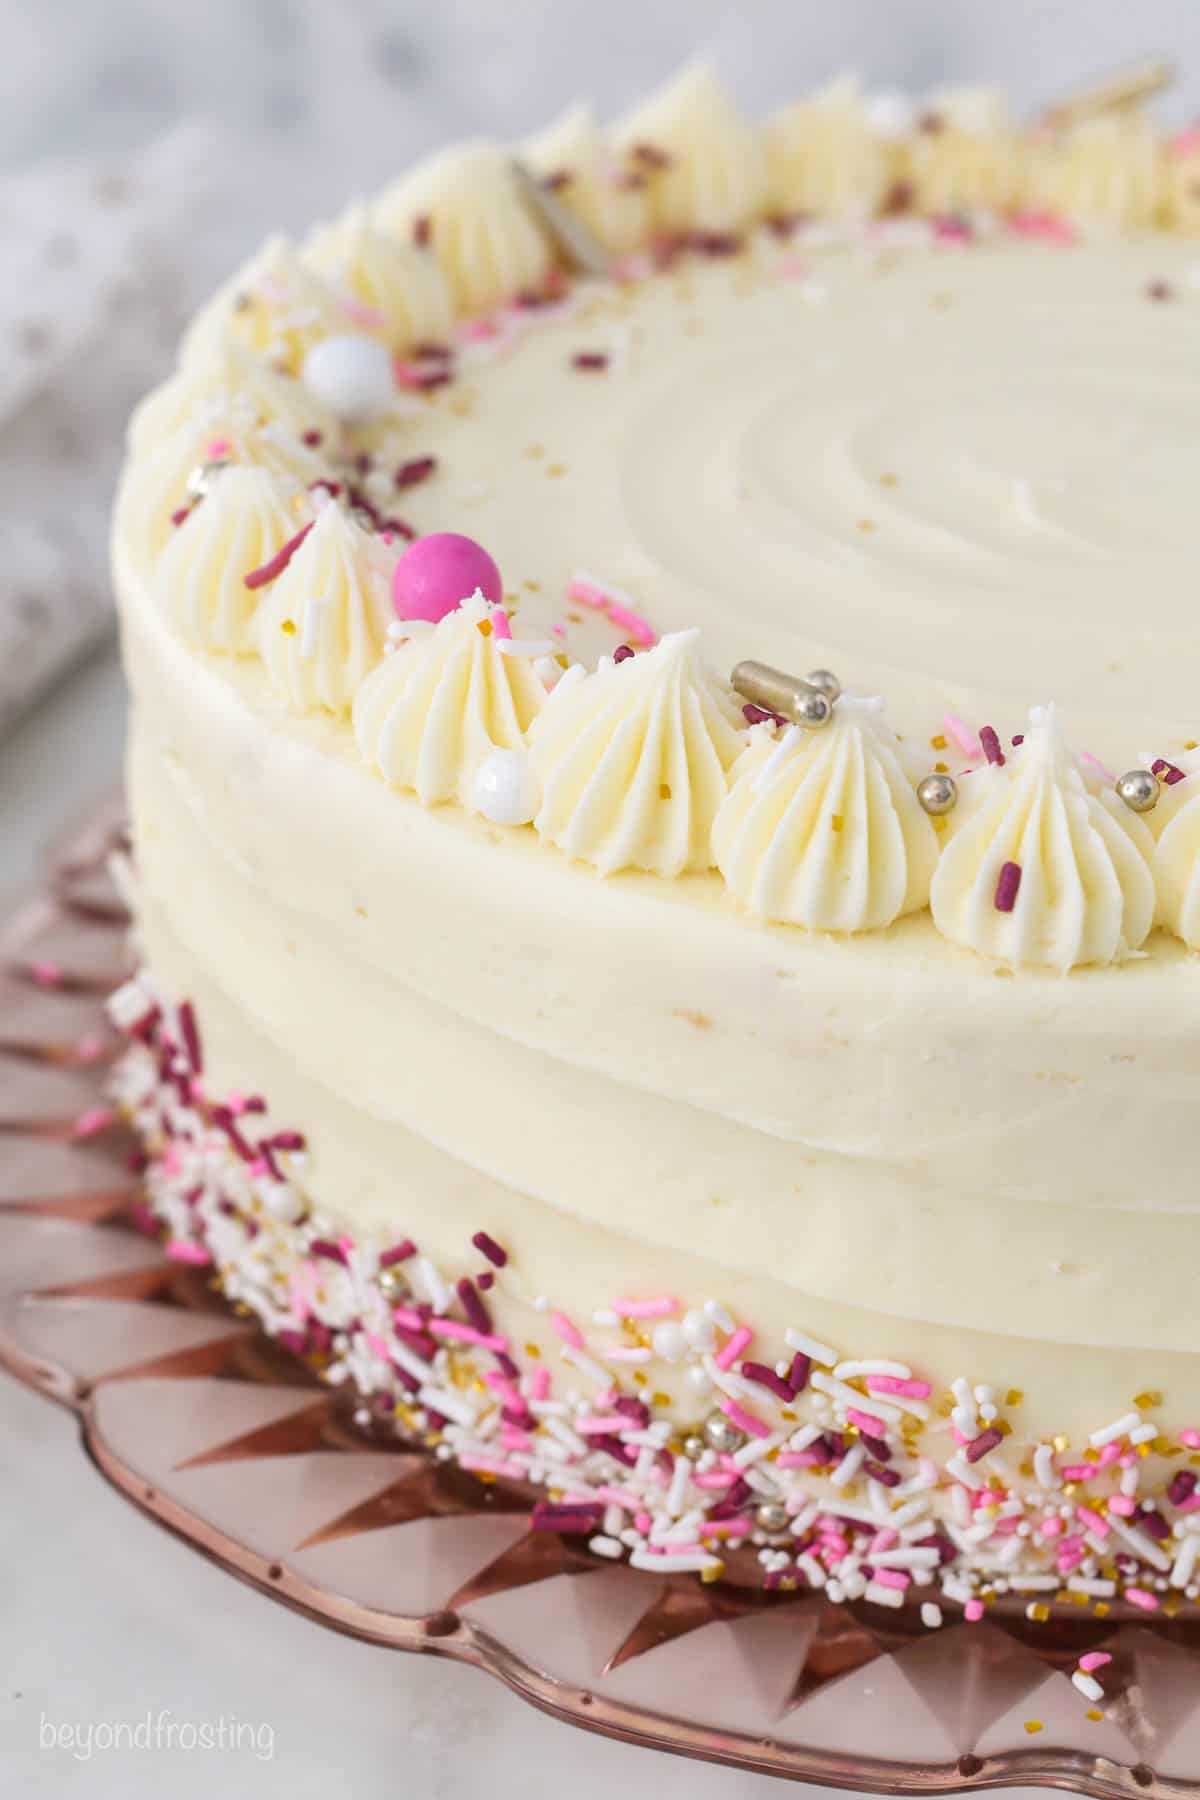 A finished frosted layer cake decorated with a crown of frosting swirls and rainbow sprinkles.